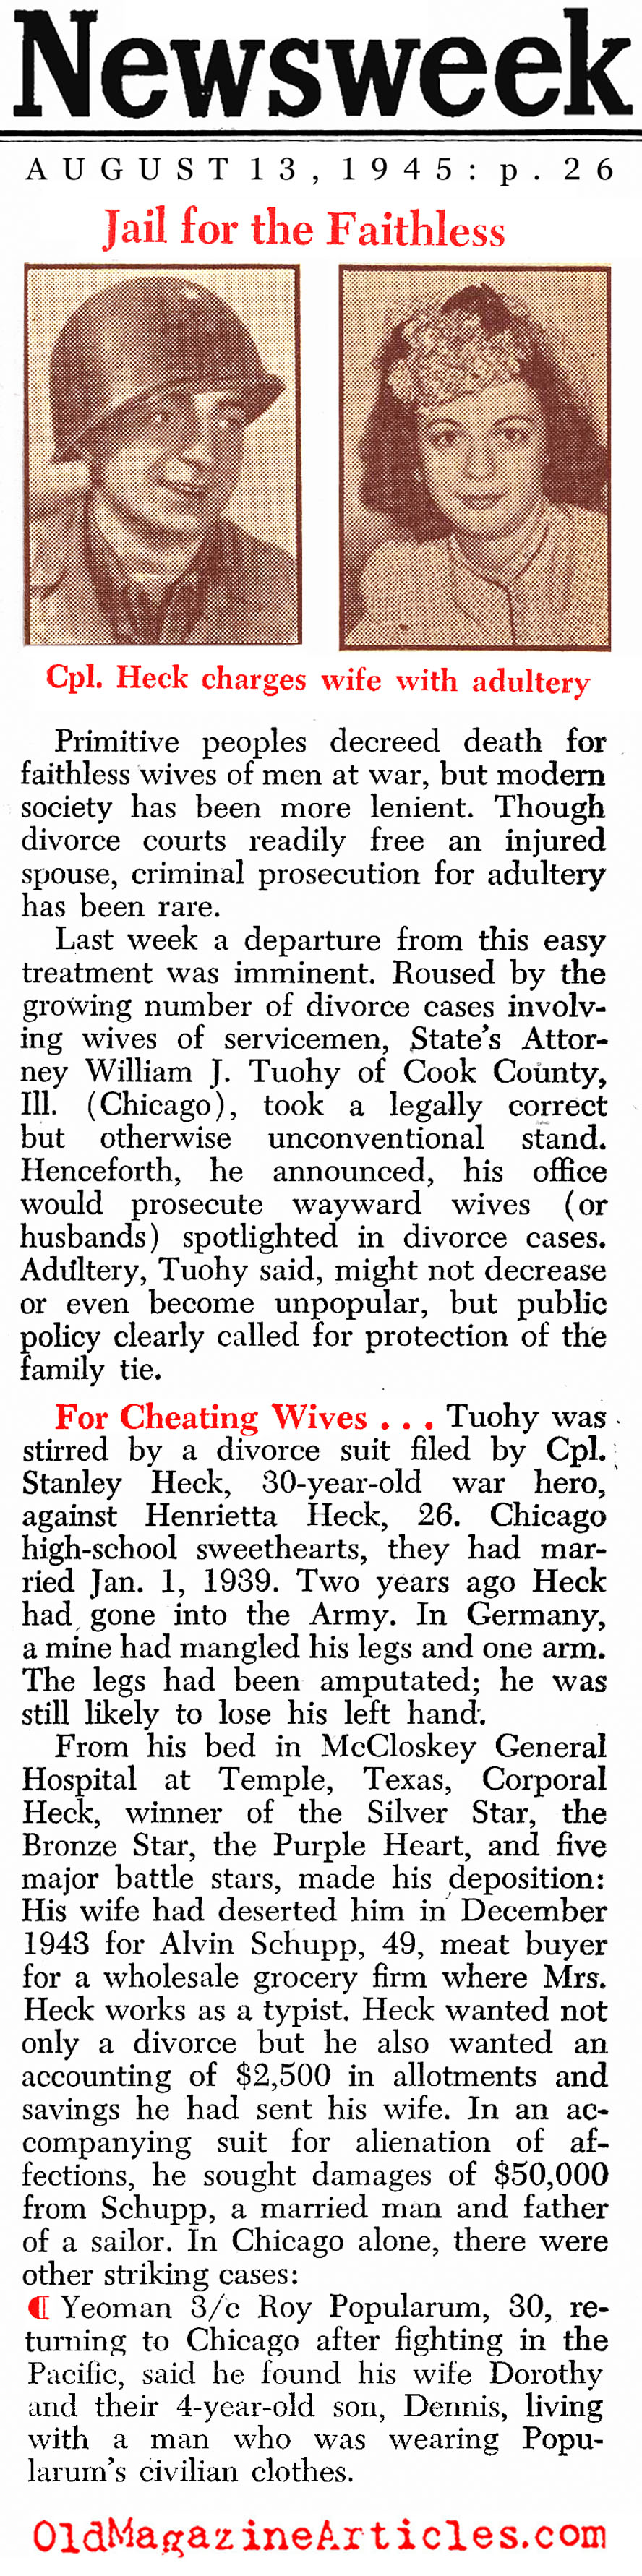 Adultery on the Home Front (Newsweek Magazine, 1945)